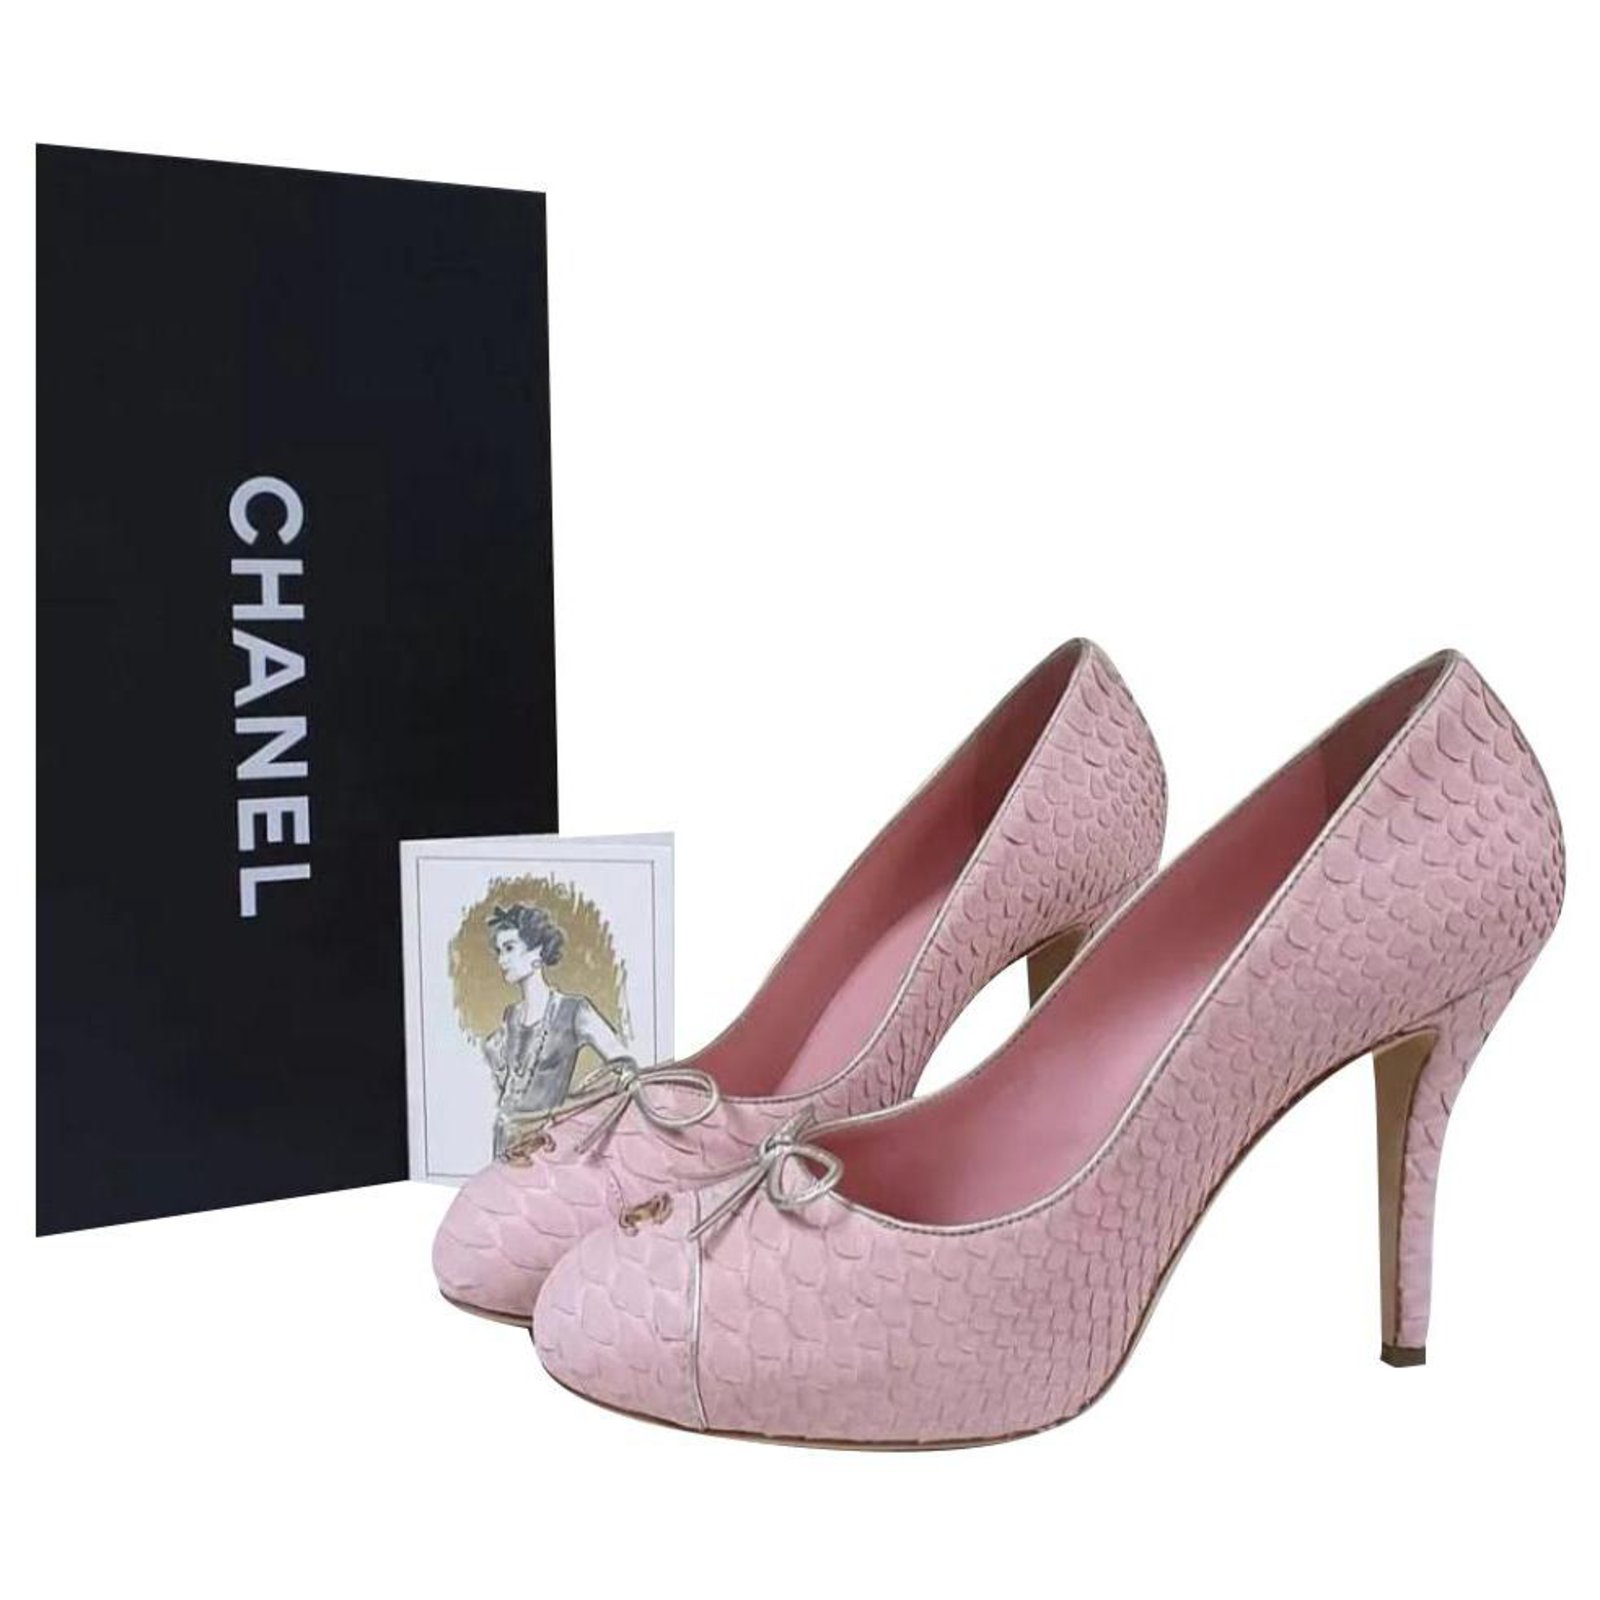 CHANEL  Shoes  Chanel Pink Bow Heels  Poshmark